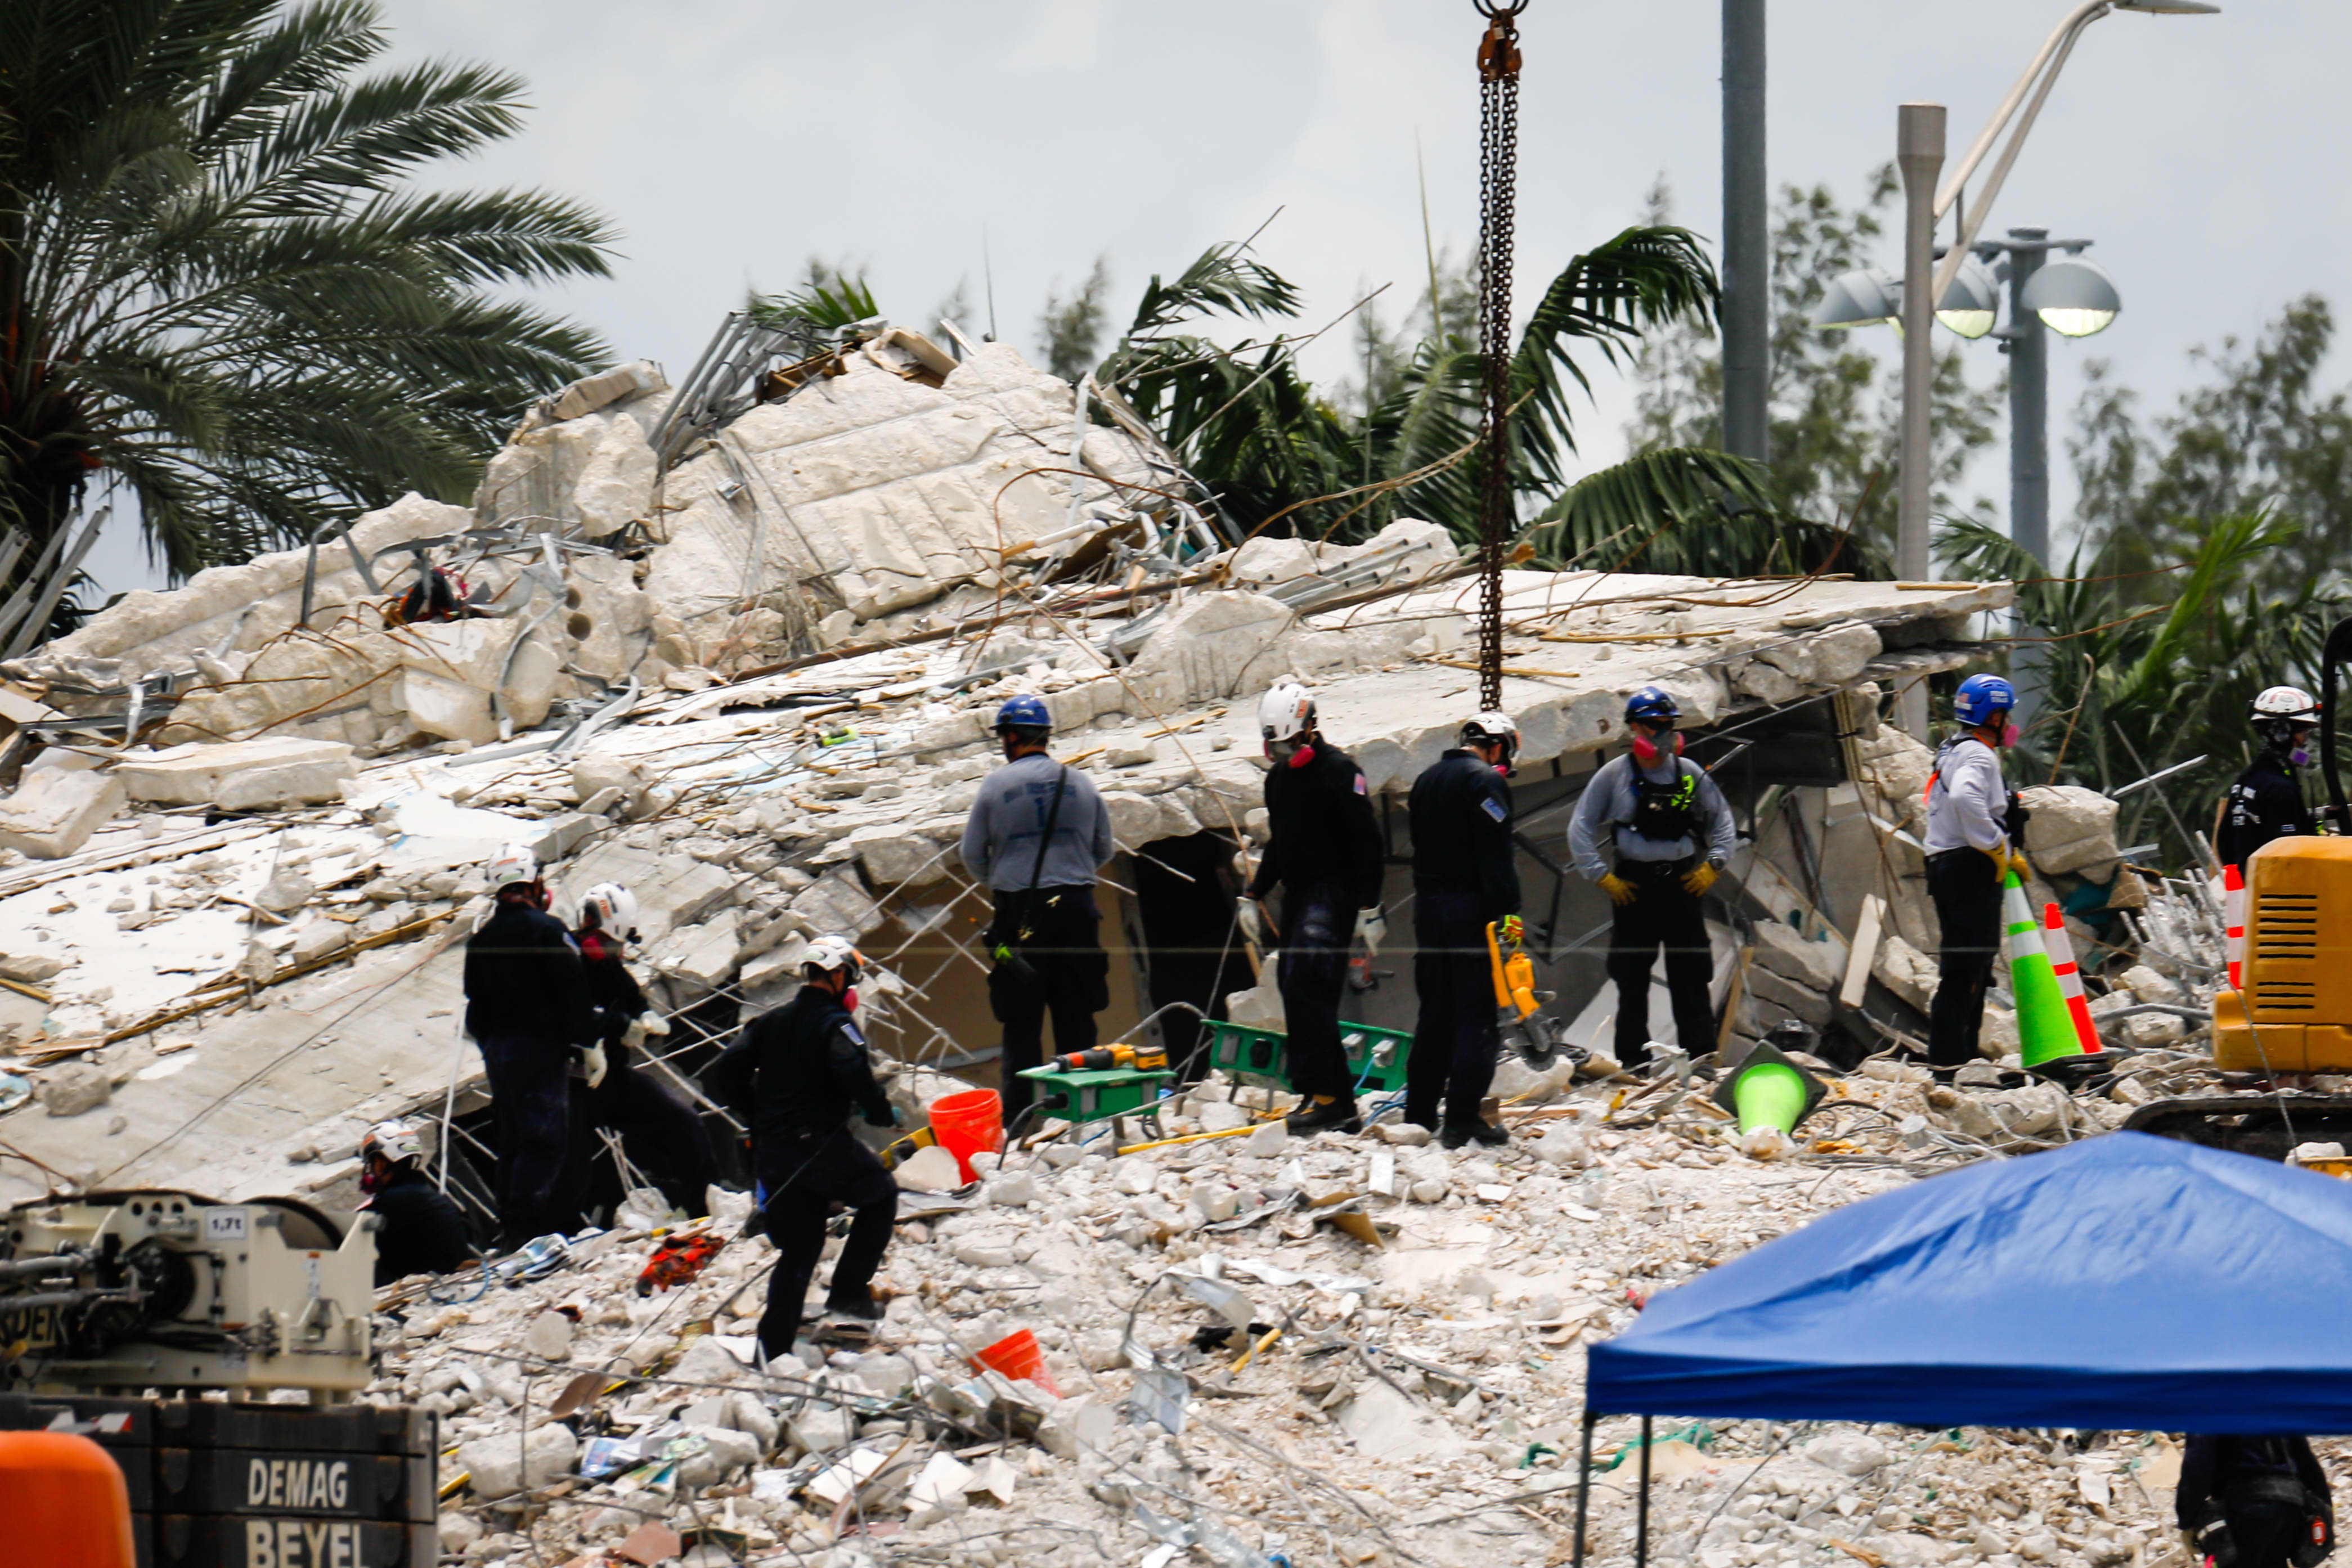 Four more victims found in the rubble of the Florida condo collapse, bringing the death toll to 32